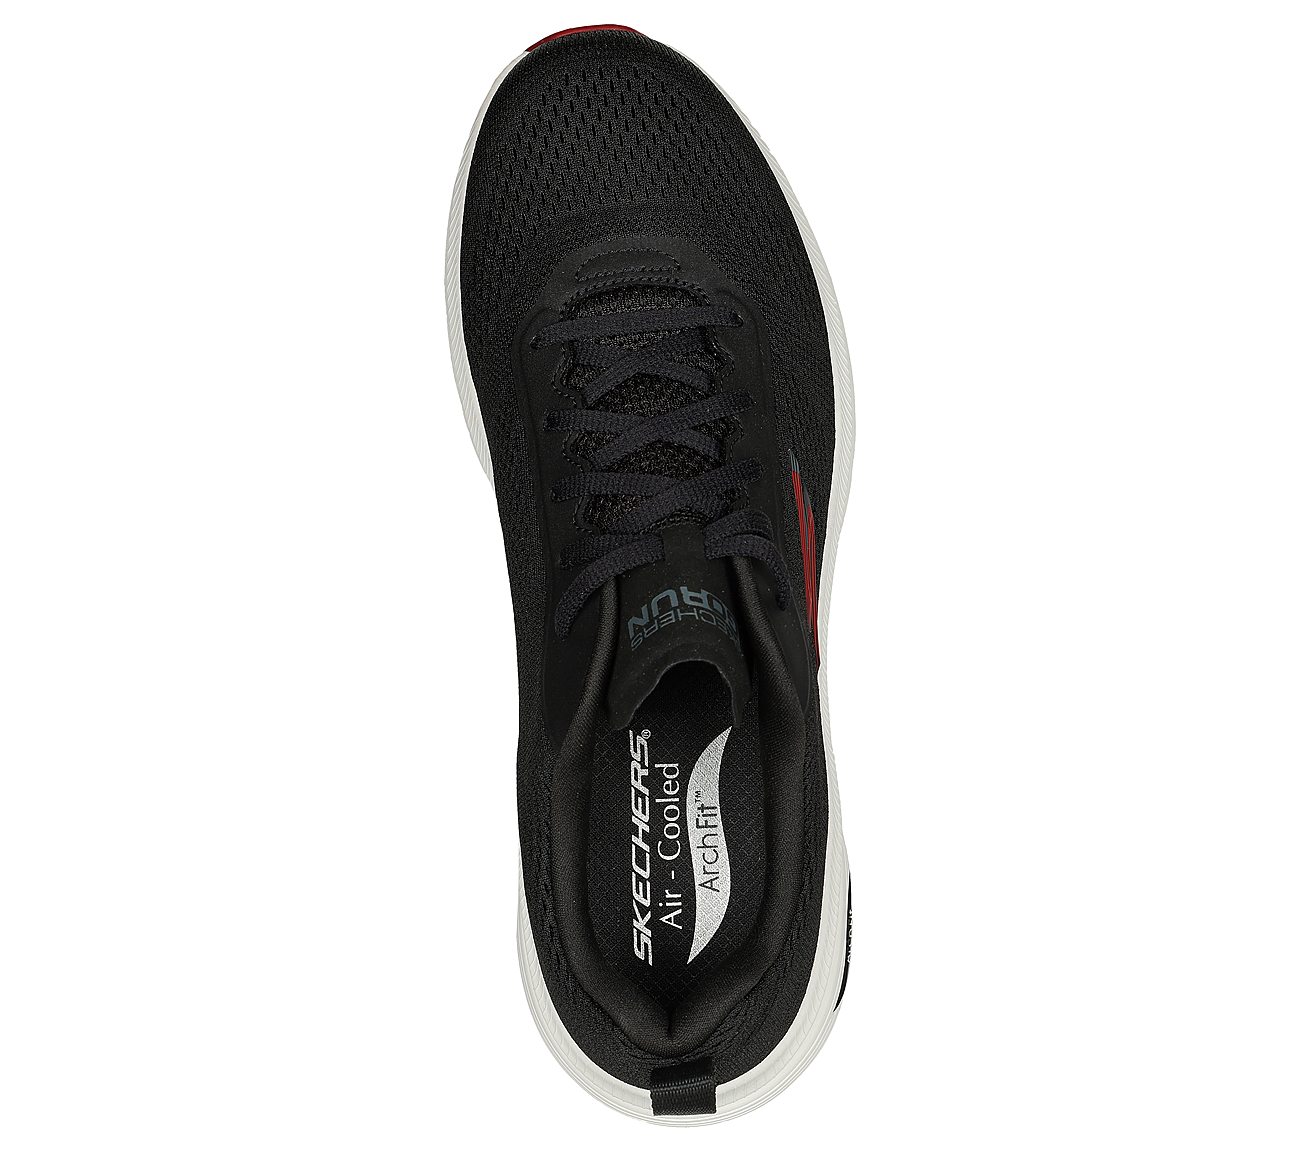 GO RUN ARCH FIT, BLACK/RED Footwear Top View